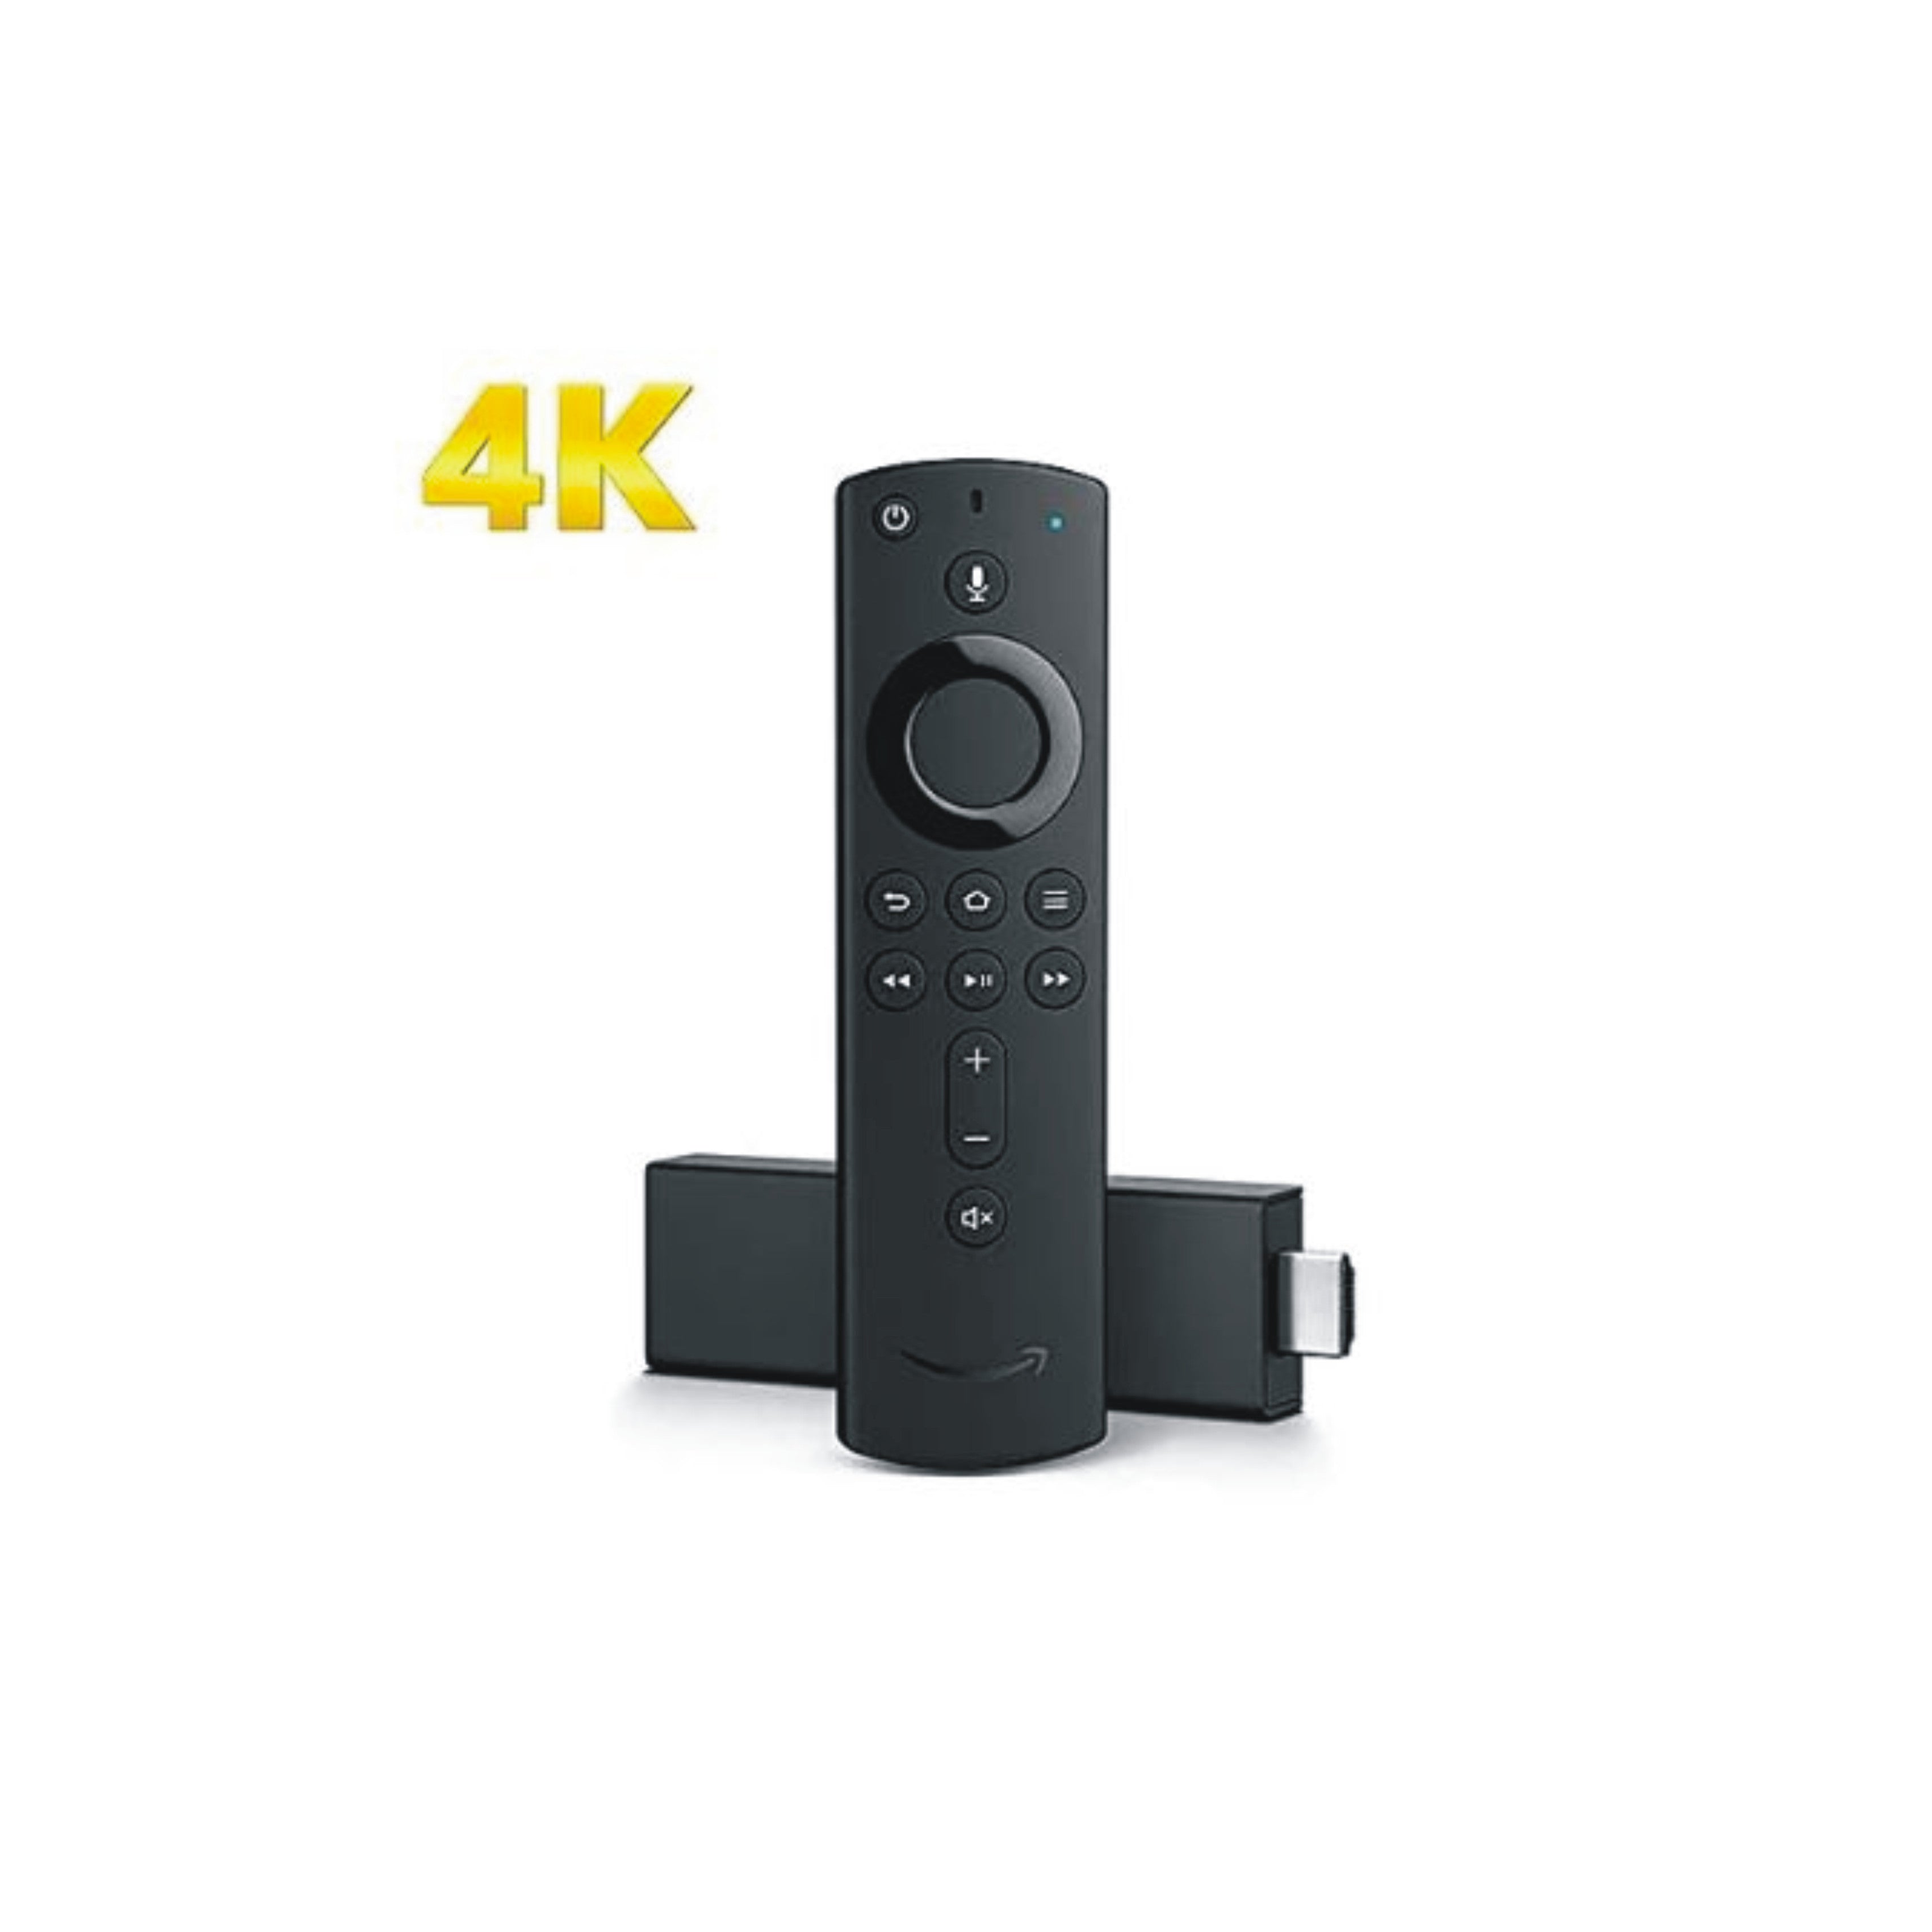 Fire TV Stick Remote Replacement for Fire TV Stick, Fire TV Stick